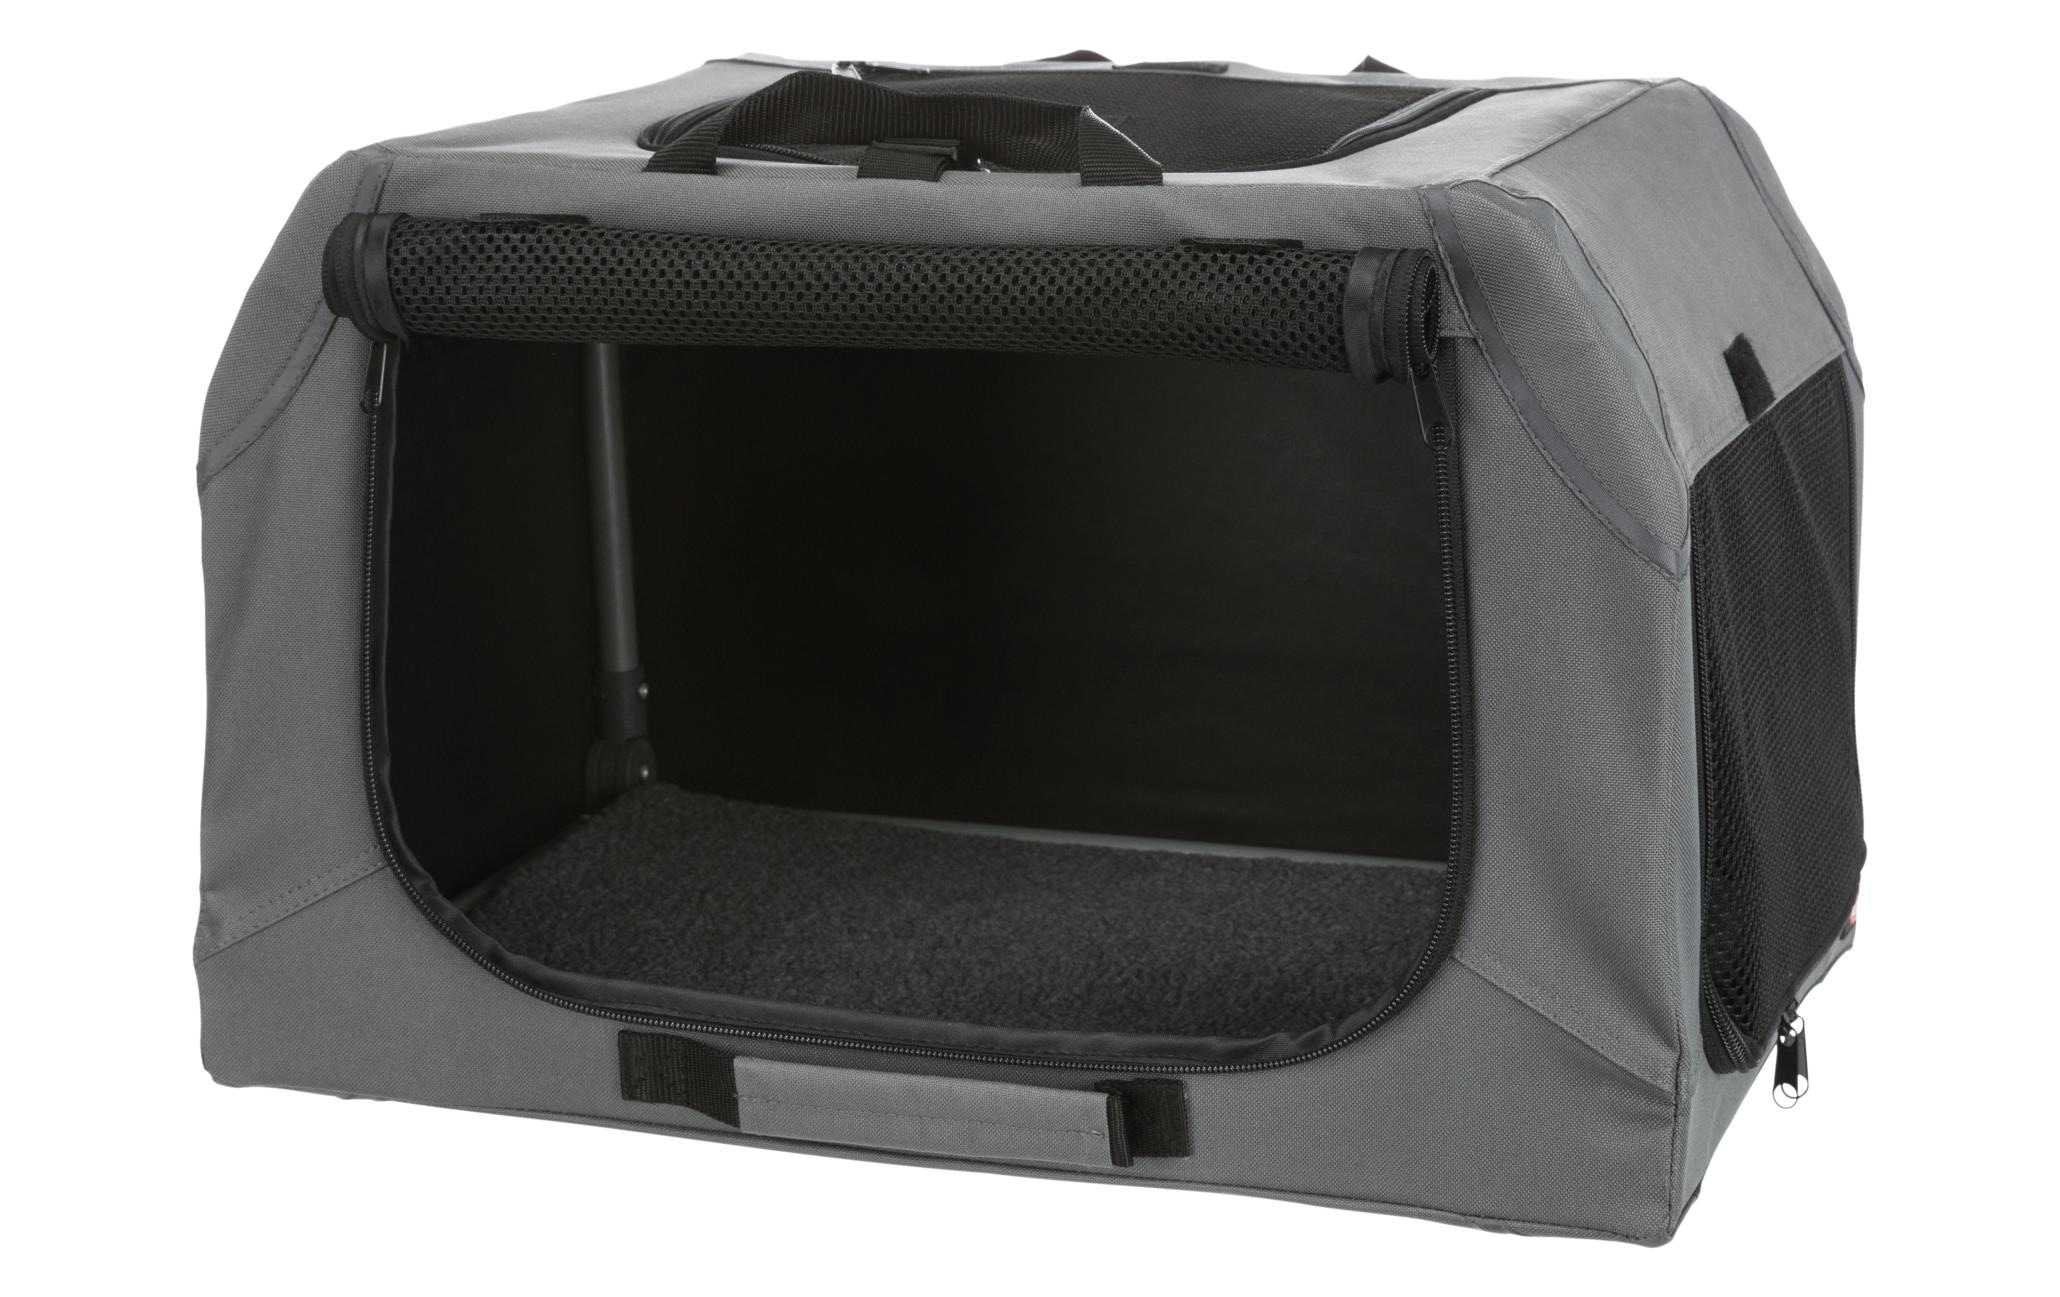 Tiertransportbox »Trixie Transportbox Soft Kennel Easy«